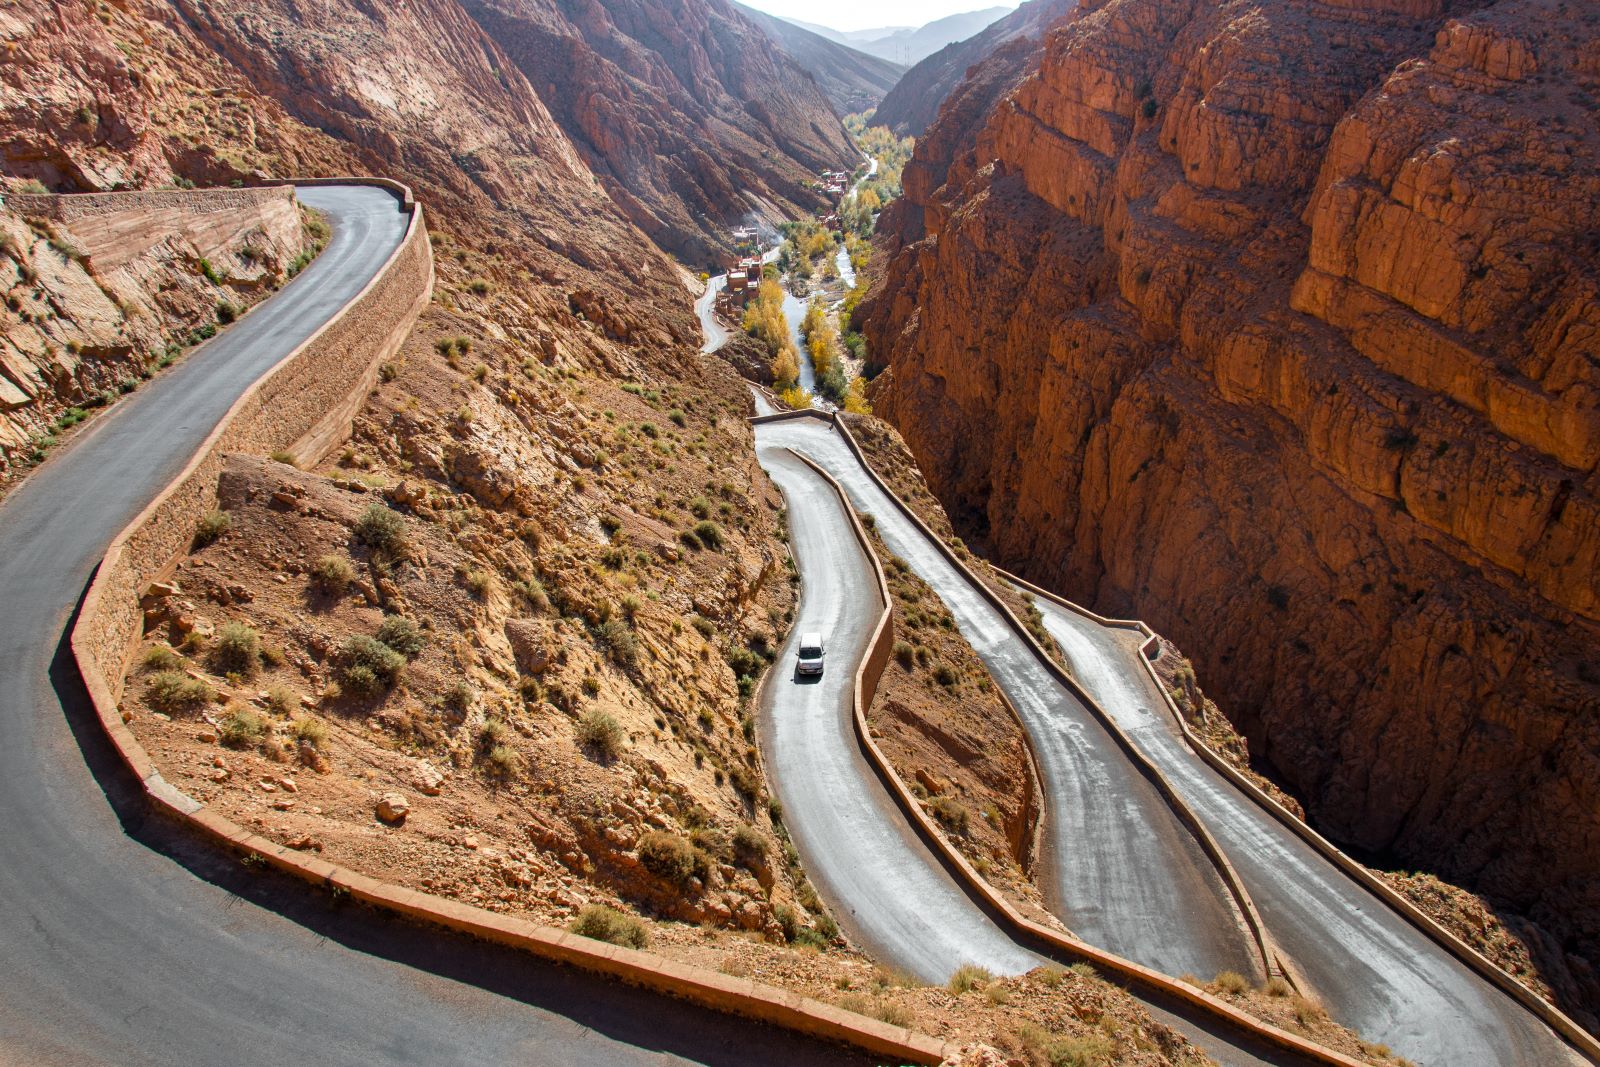 A winding road through the Dades Valley